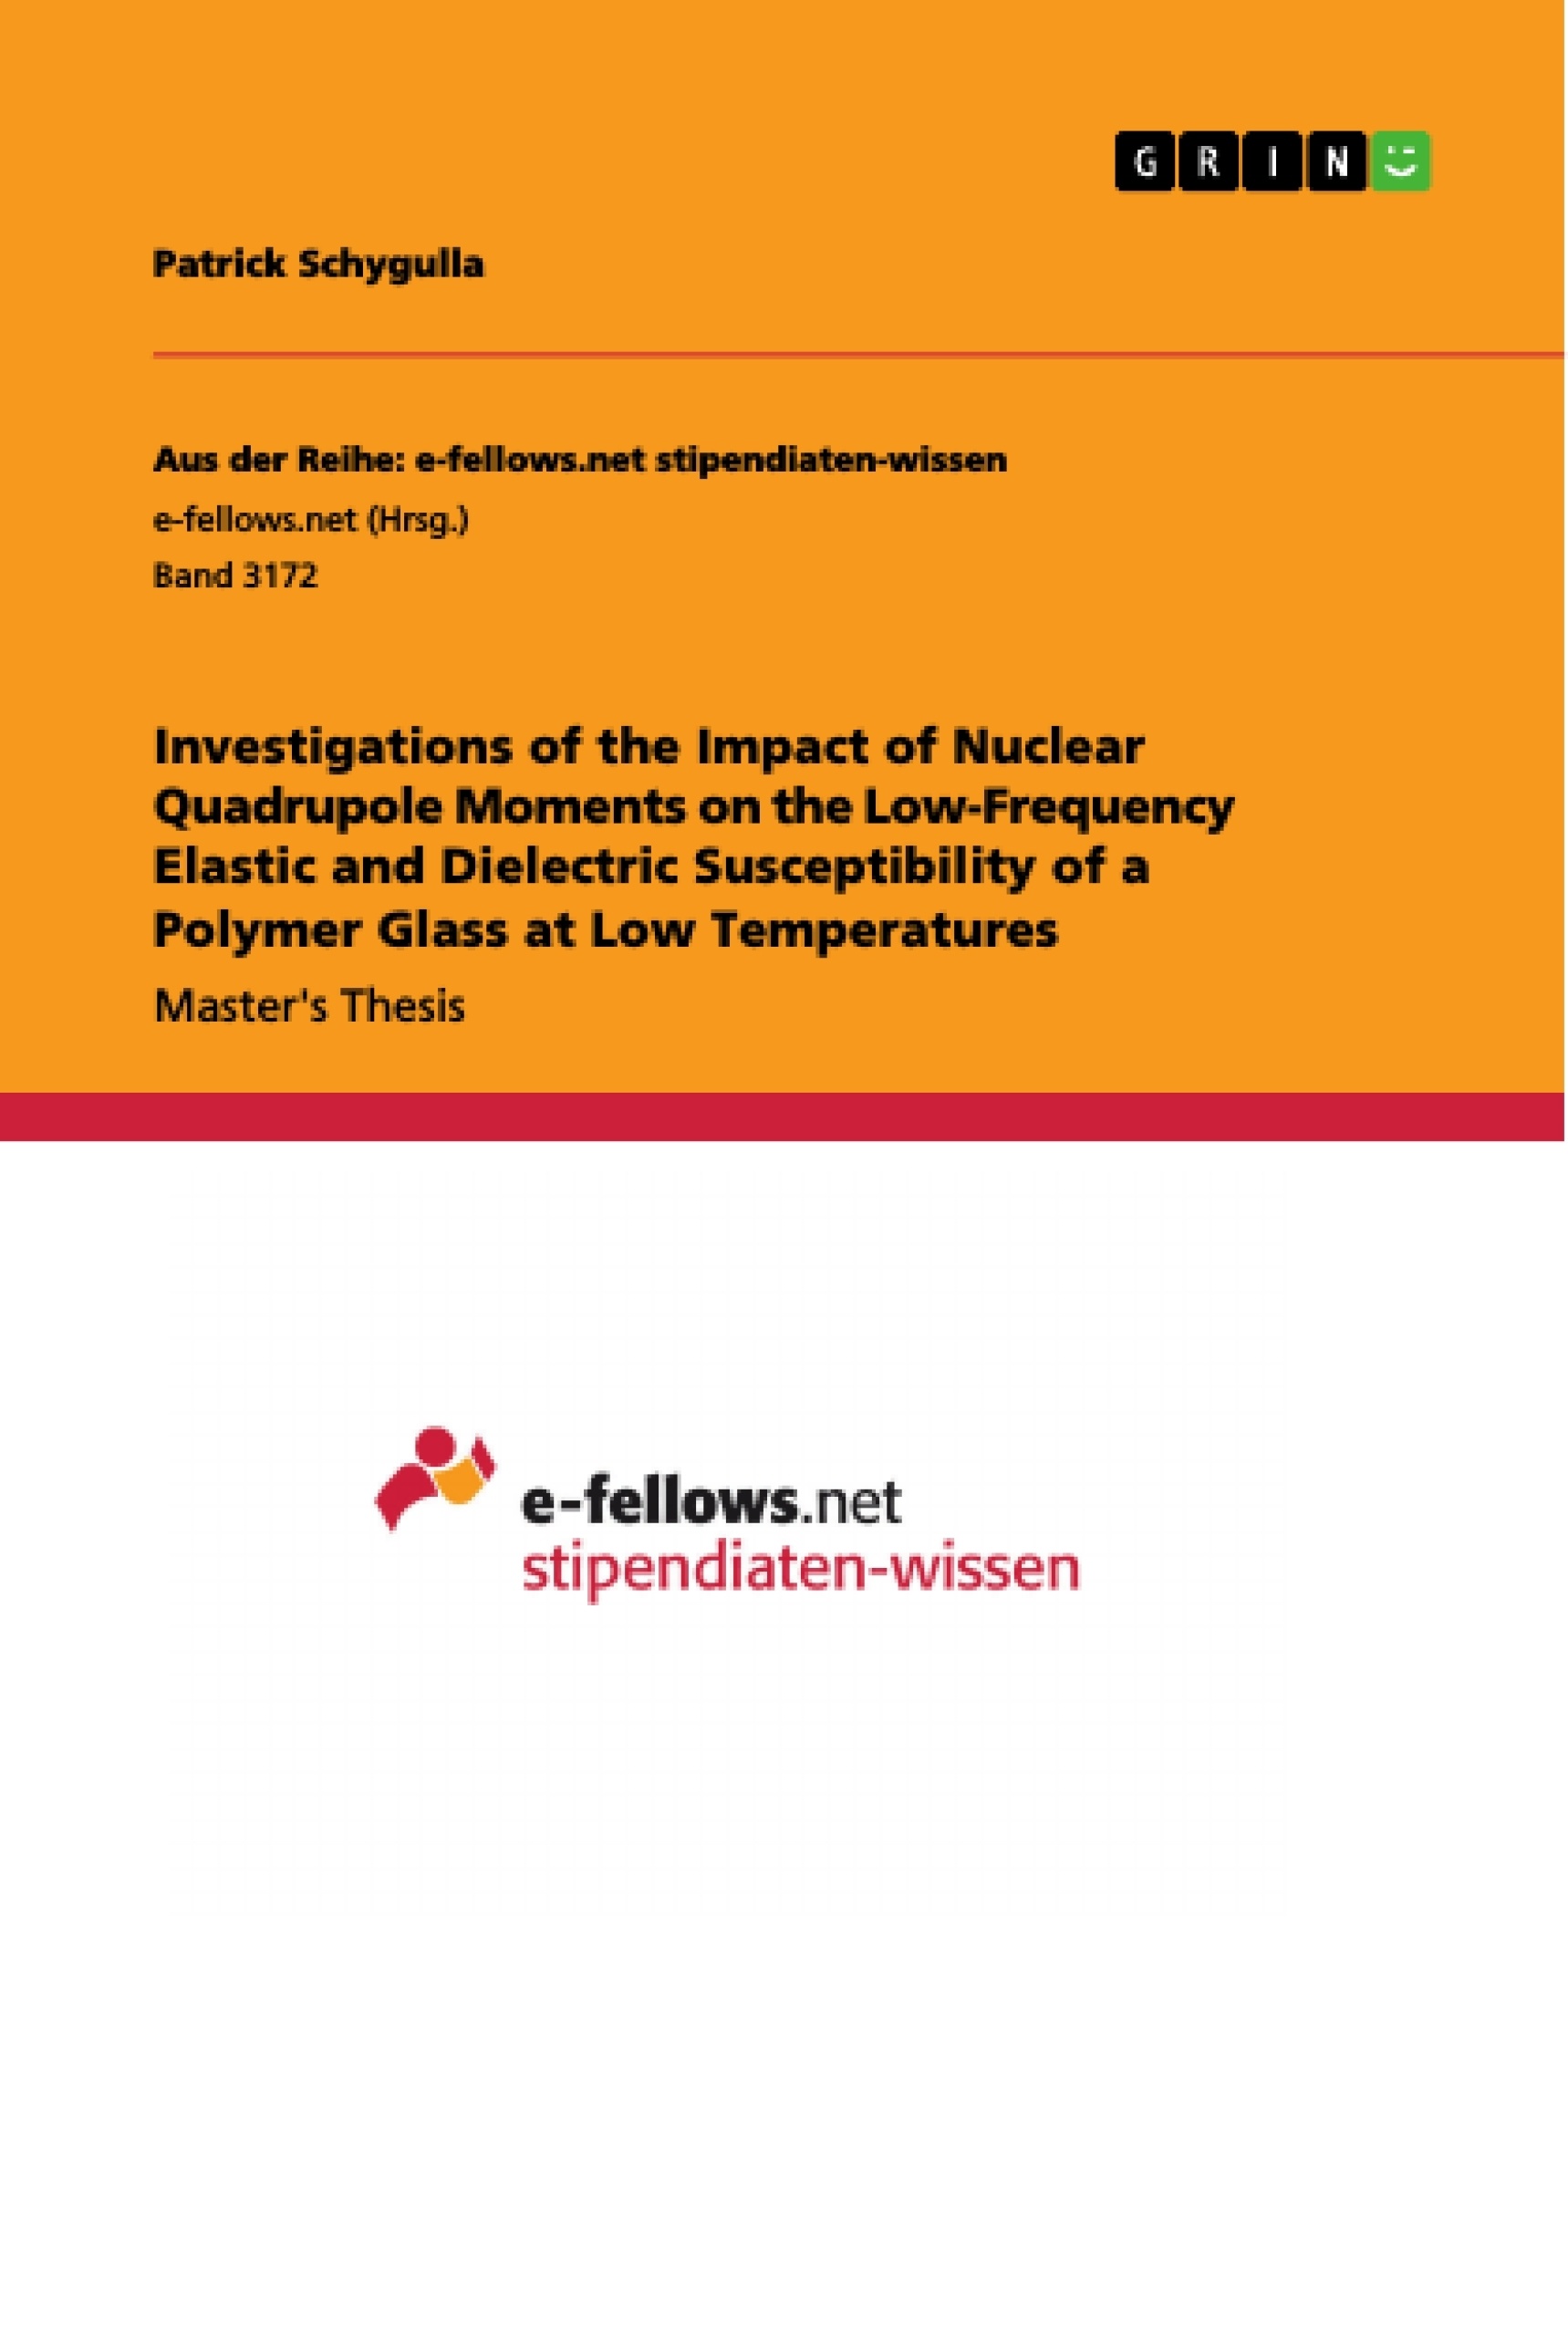 Title: Investigations of the Impact of Nuclear Quadrupole Moments on the Low-Frequency Elastic and Dielectric Susceptibility of a Polymer Glass at Low Temperatures